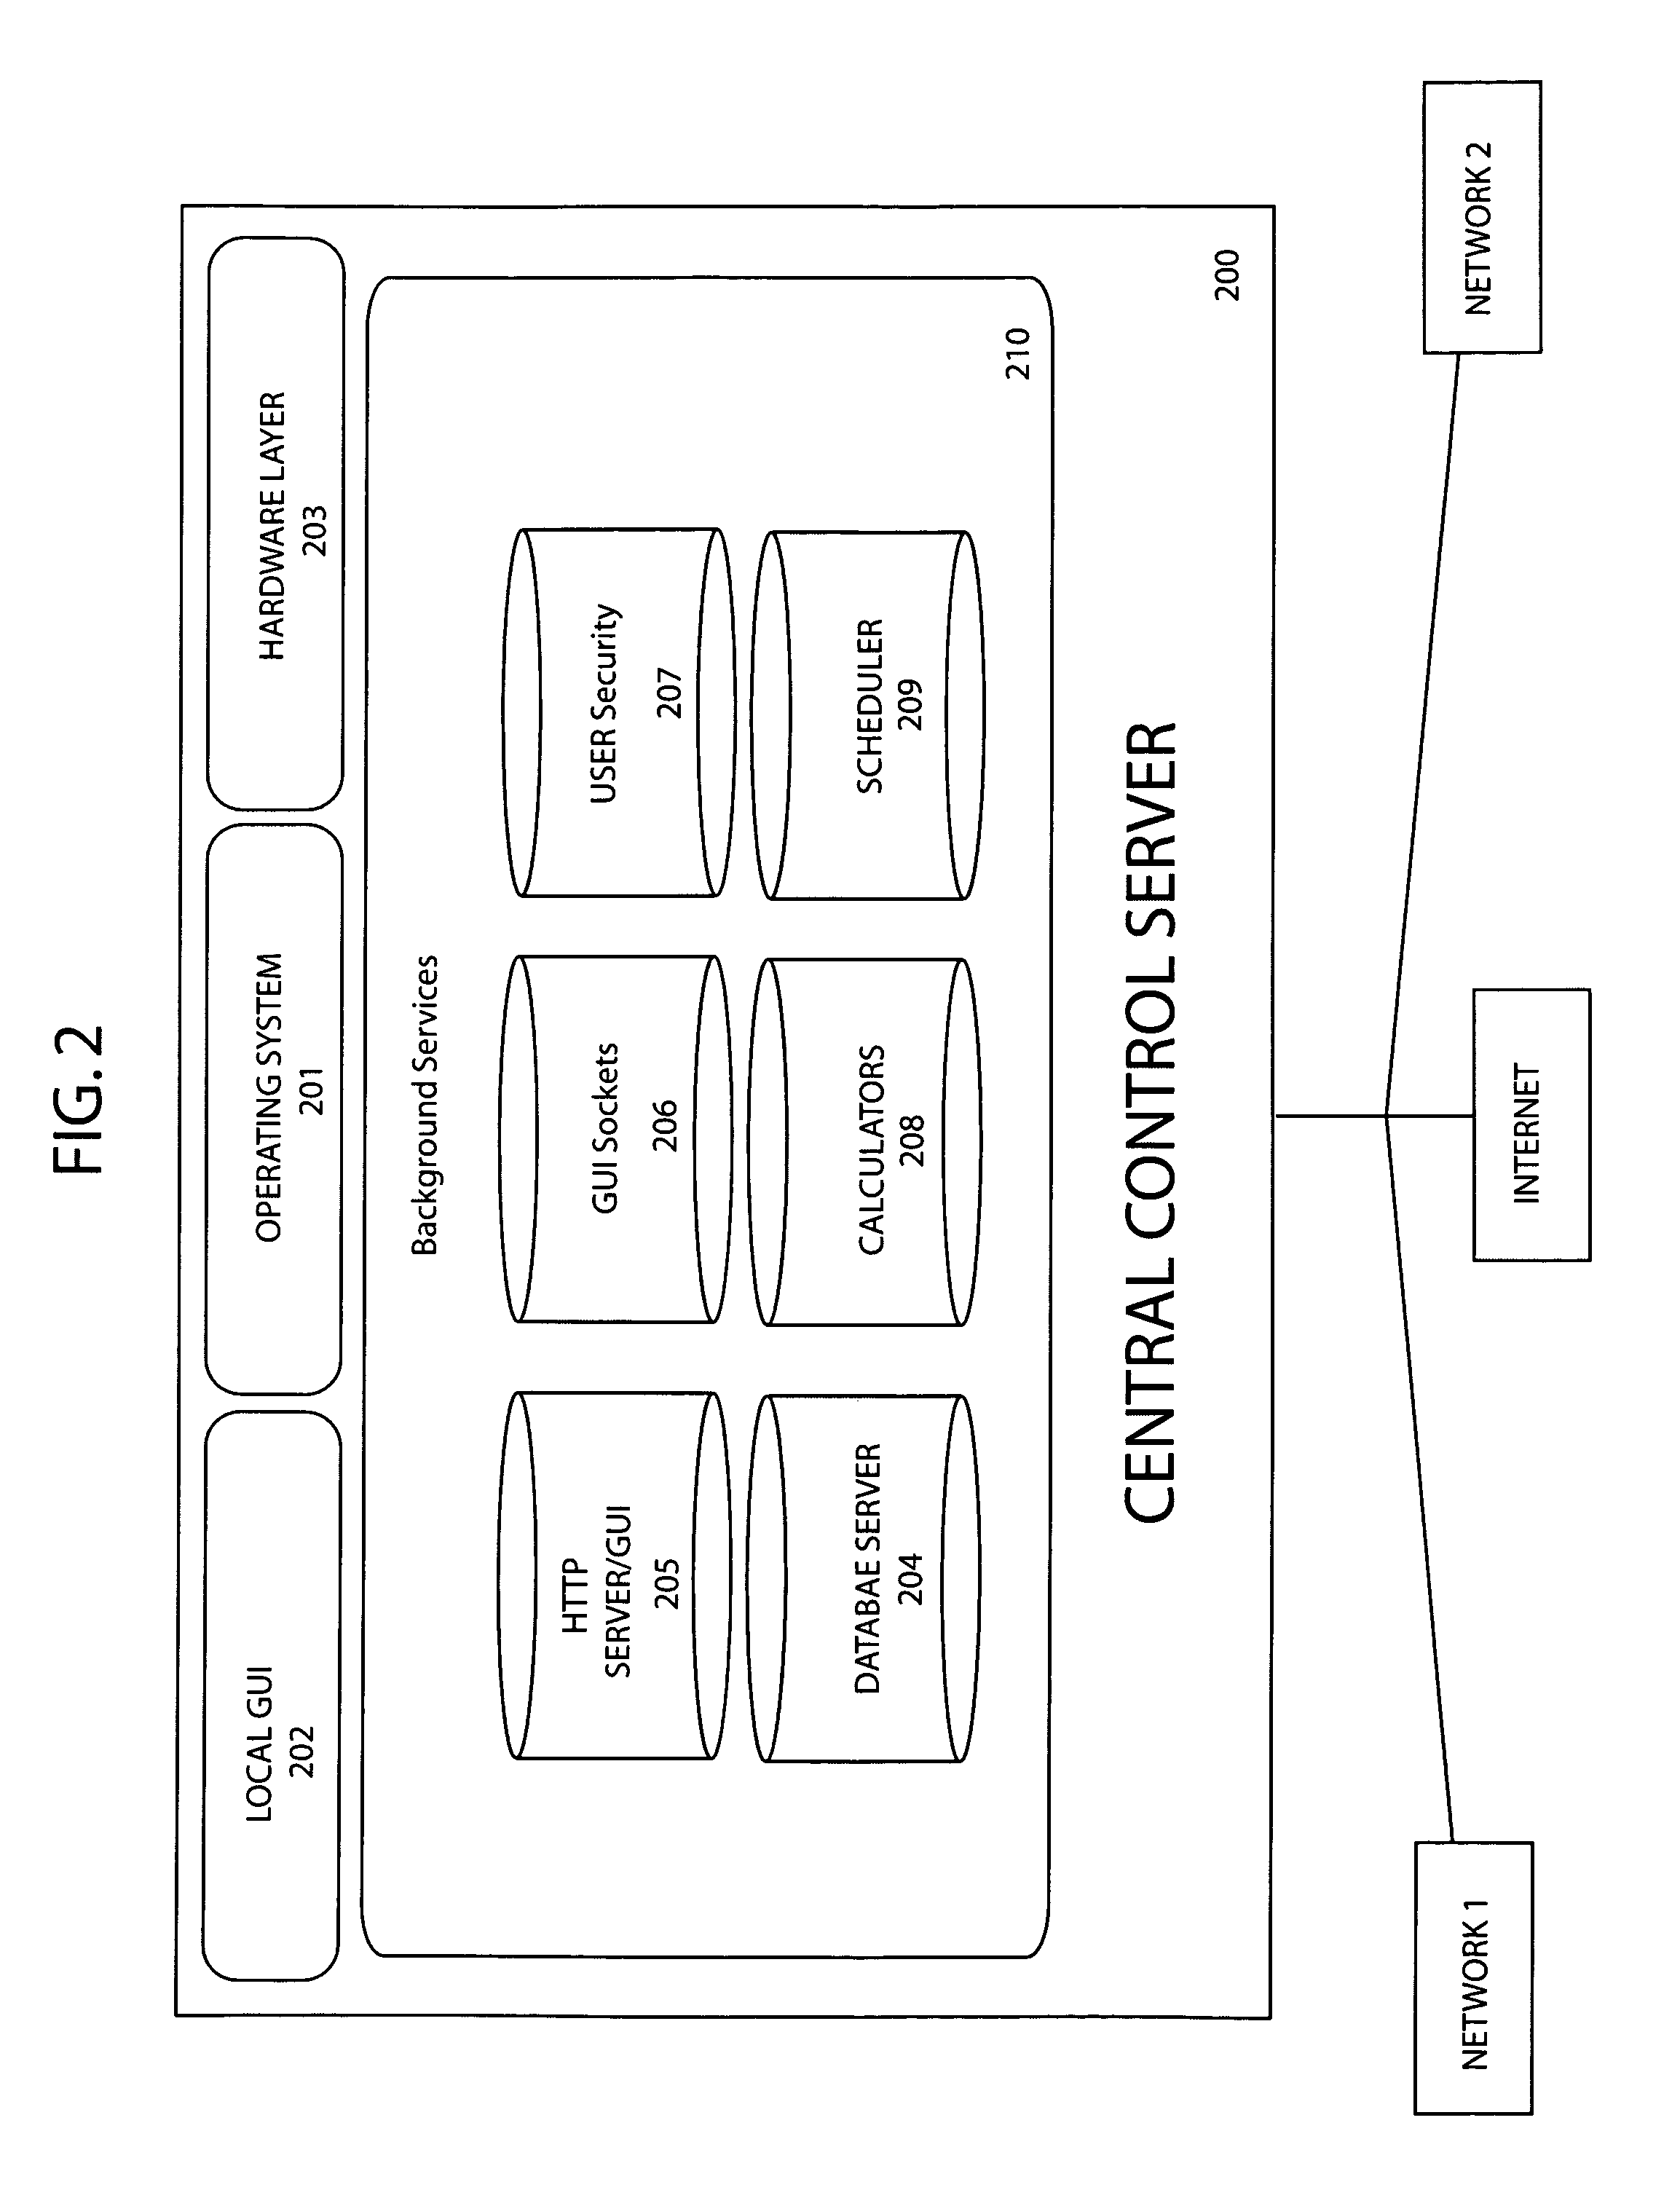 Irrigation field module matrix configured for wireless communication with a central control server